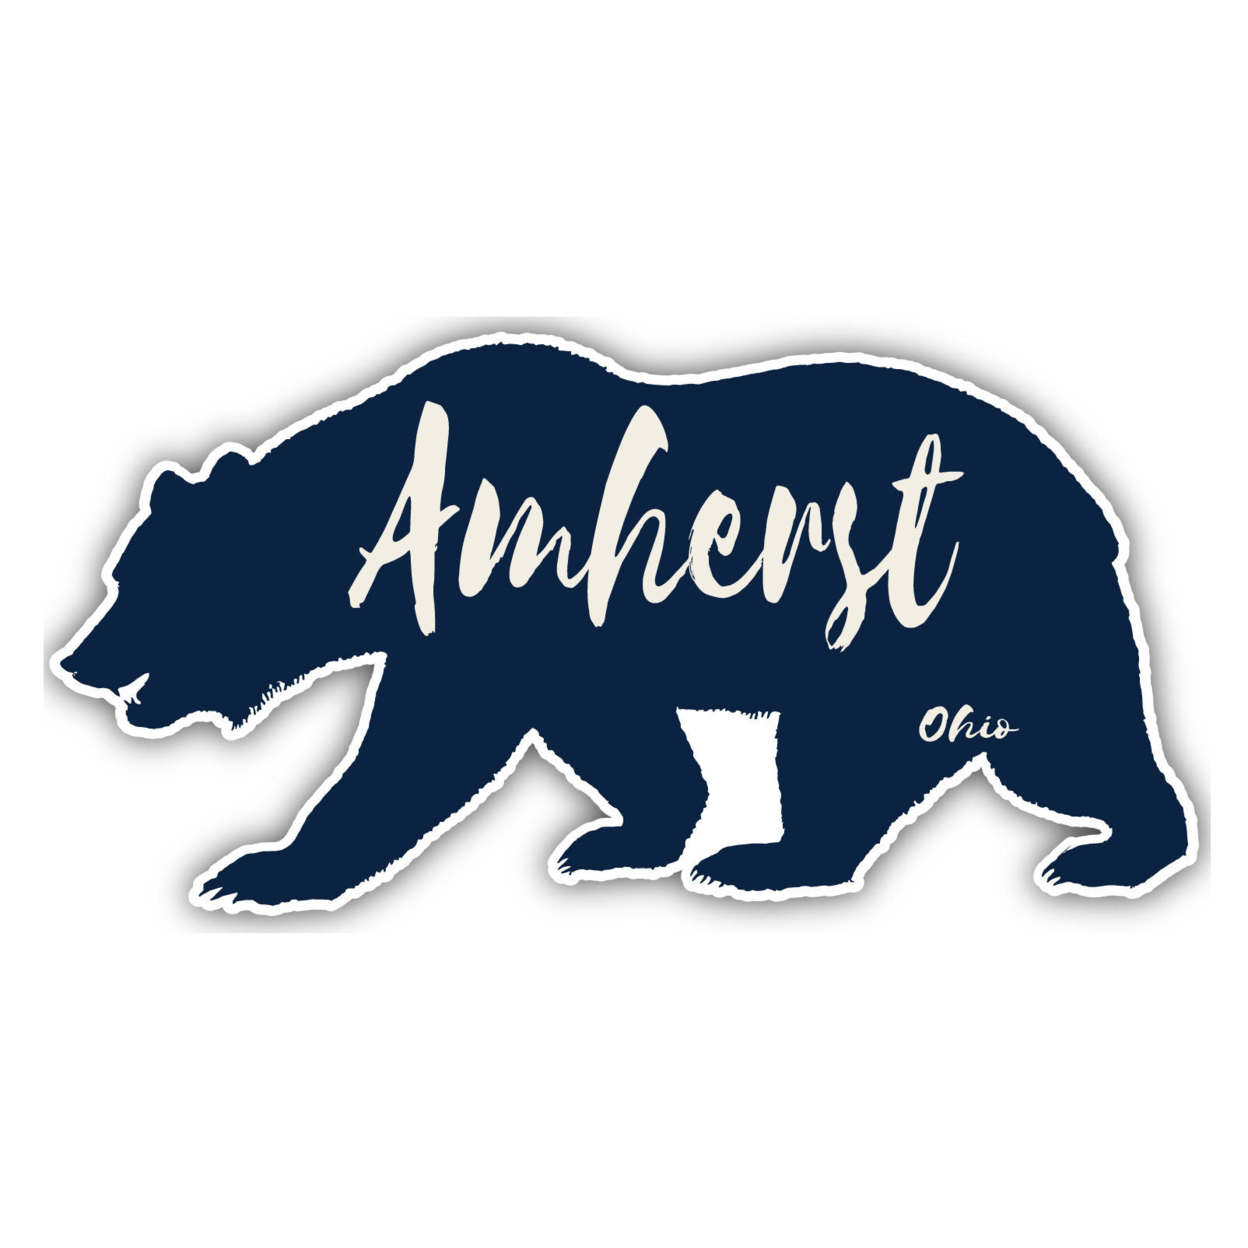 Amherst Ohio Souvenir Decorative Stickers (Choose Theme And Size) - 4-Pack, 8-Inch, Bear